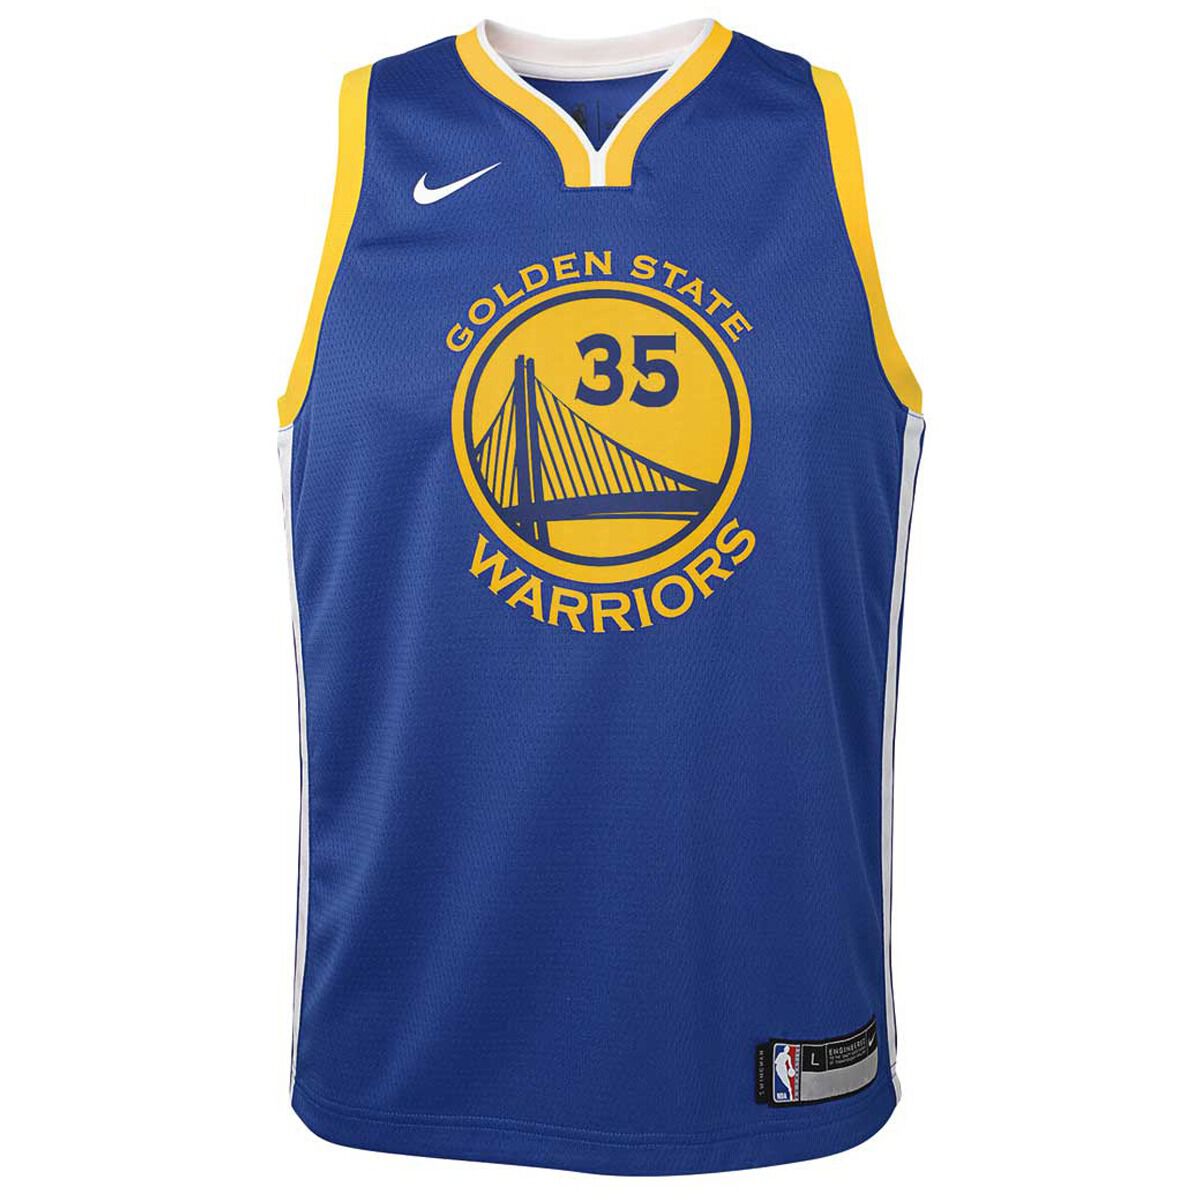 kevin durant youth medium jersey